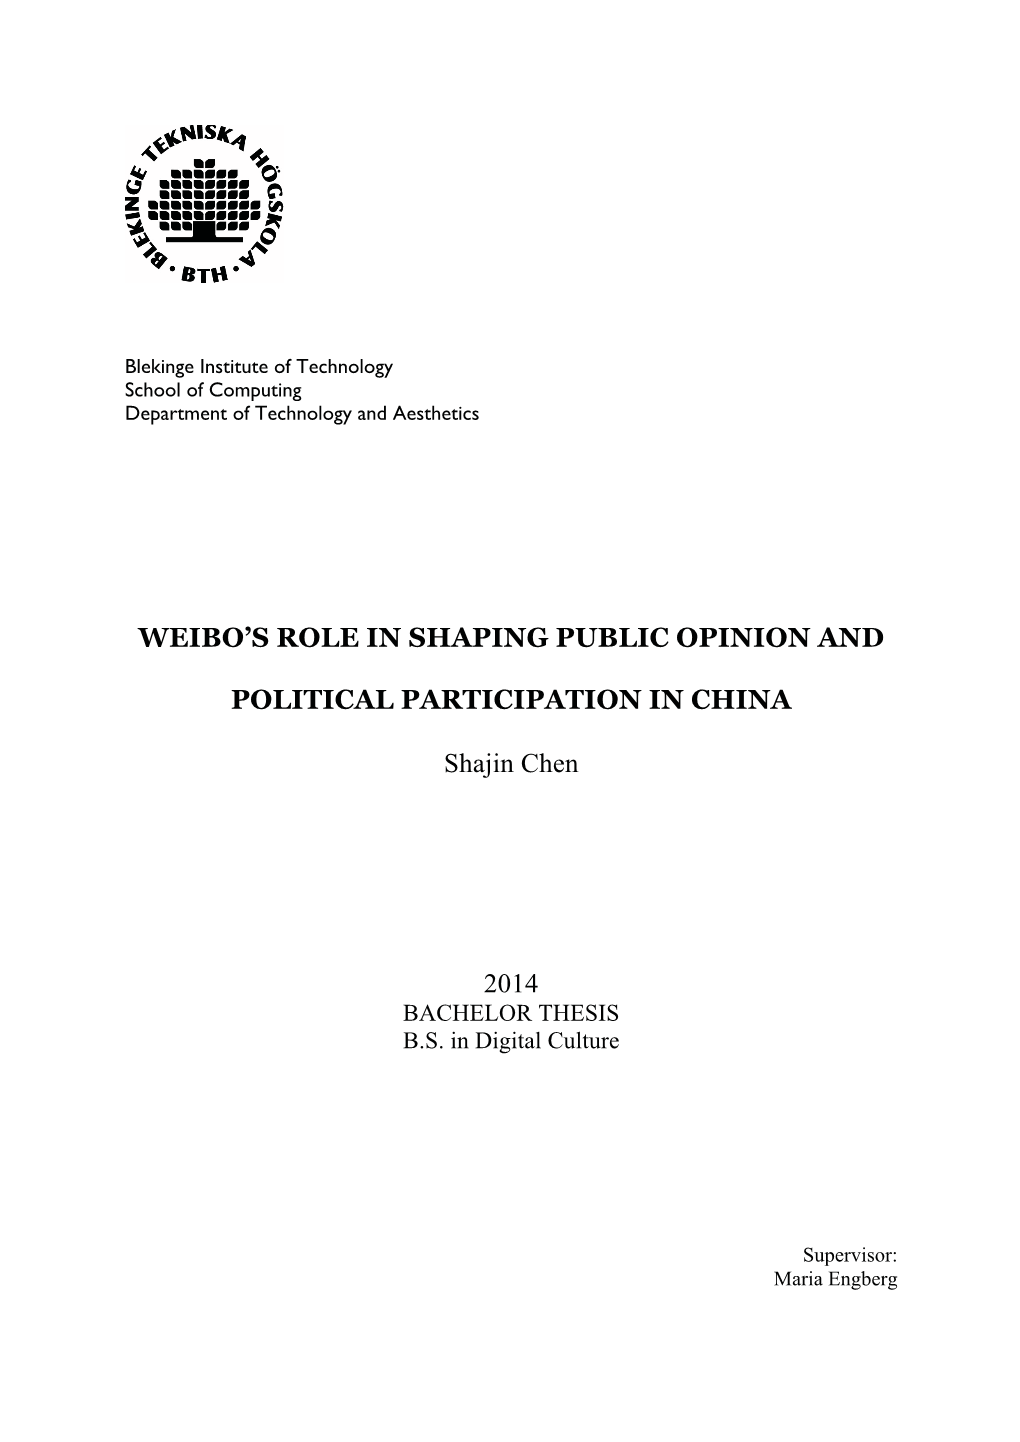 Weibo's Role in Shaping Public Opinion and Political